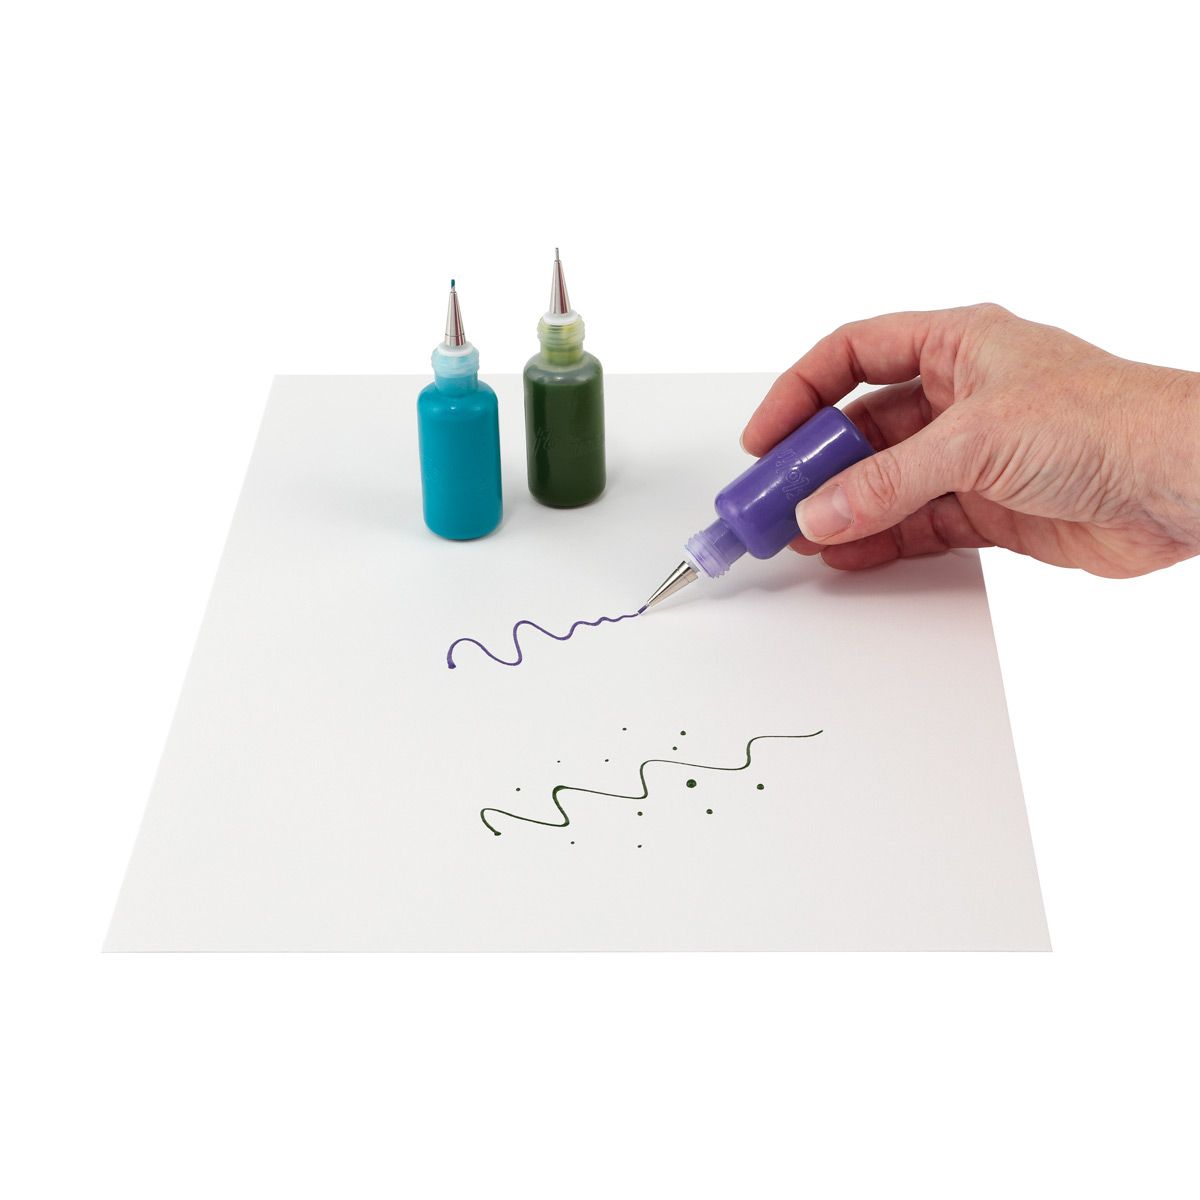 Create fine lines, squiggles, controlled drips, and squirts, even for writing with fluid media